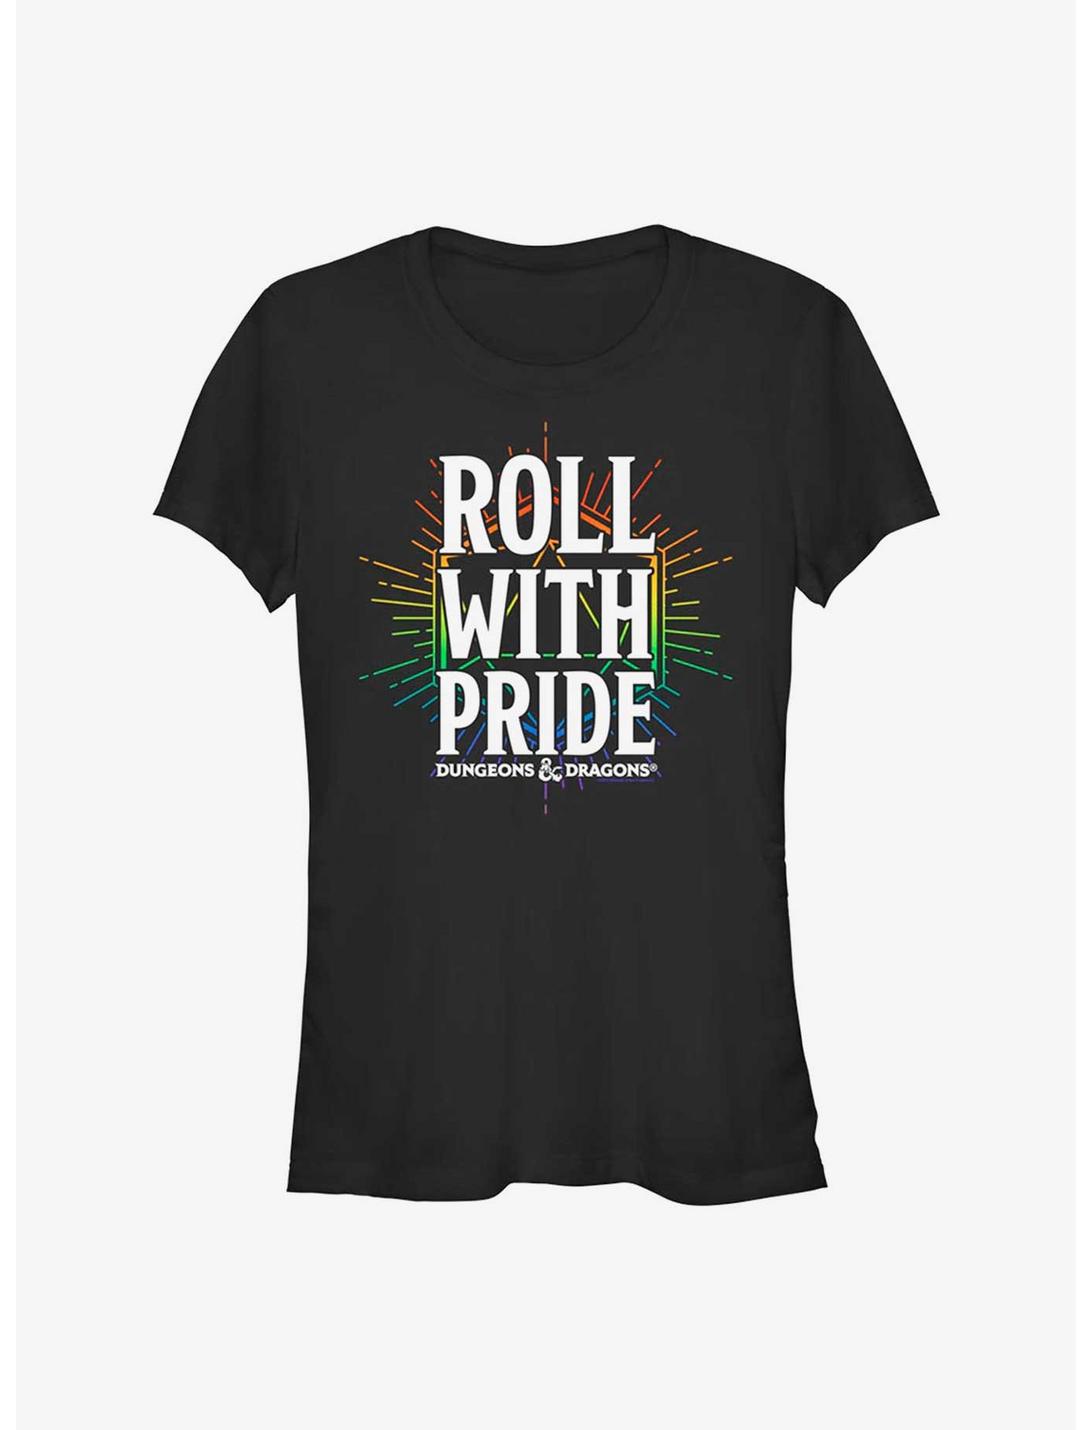 Dungeons & Dragons Roll With Pride Pride T-Shirt, BLACK, hi-res